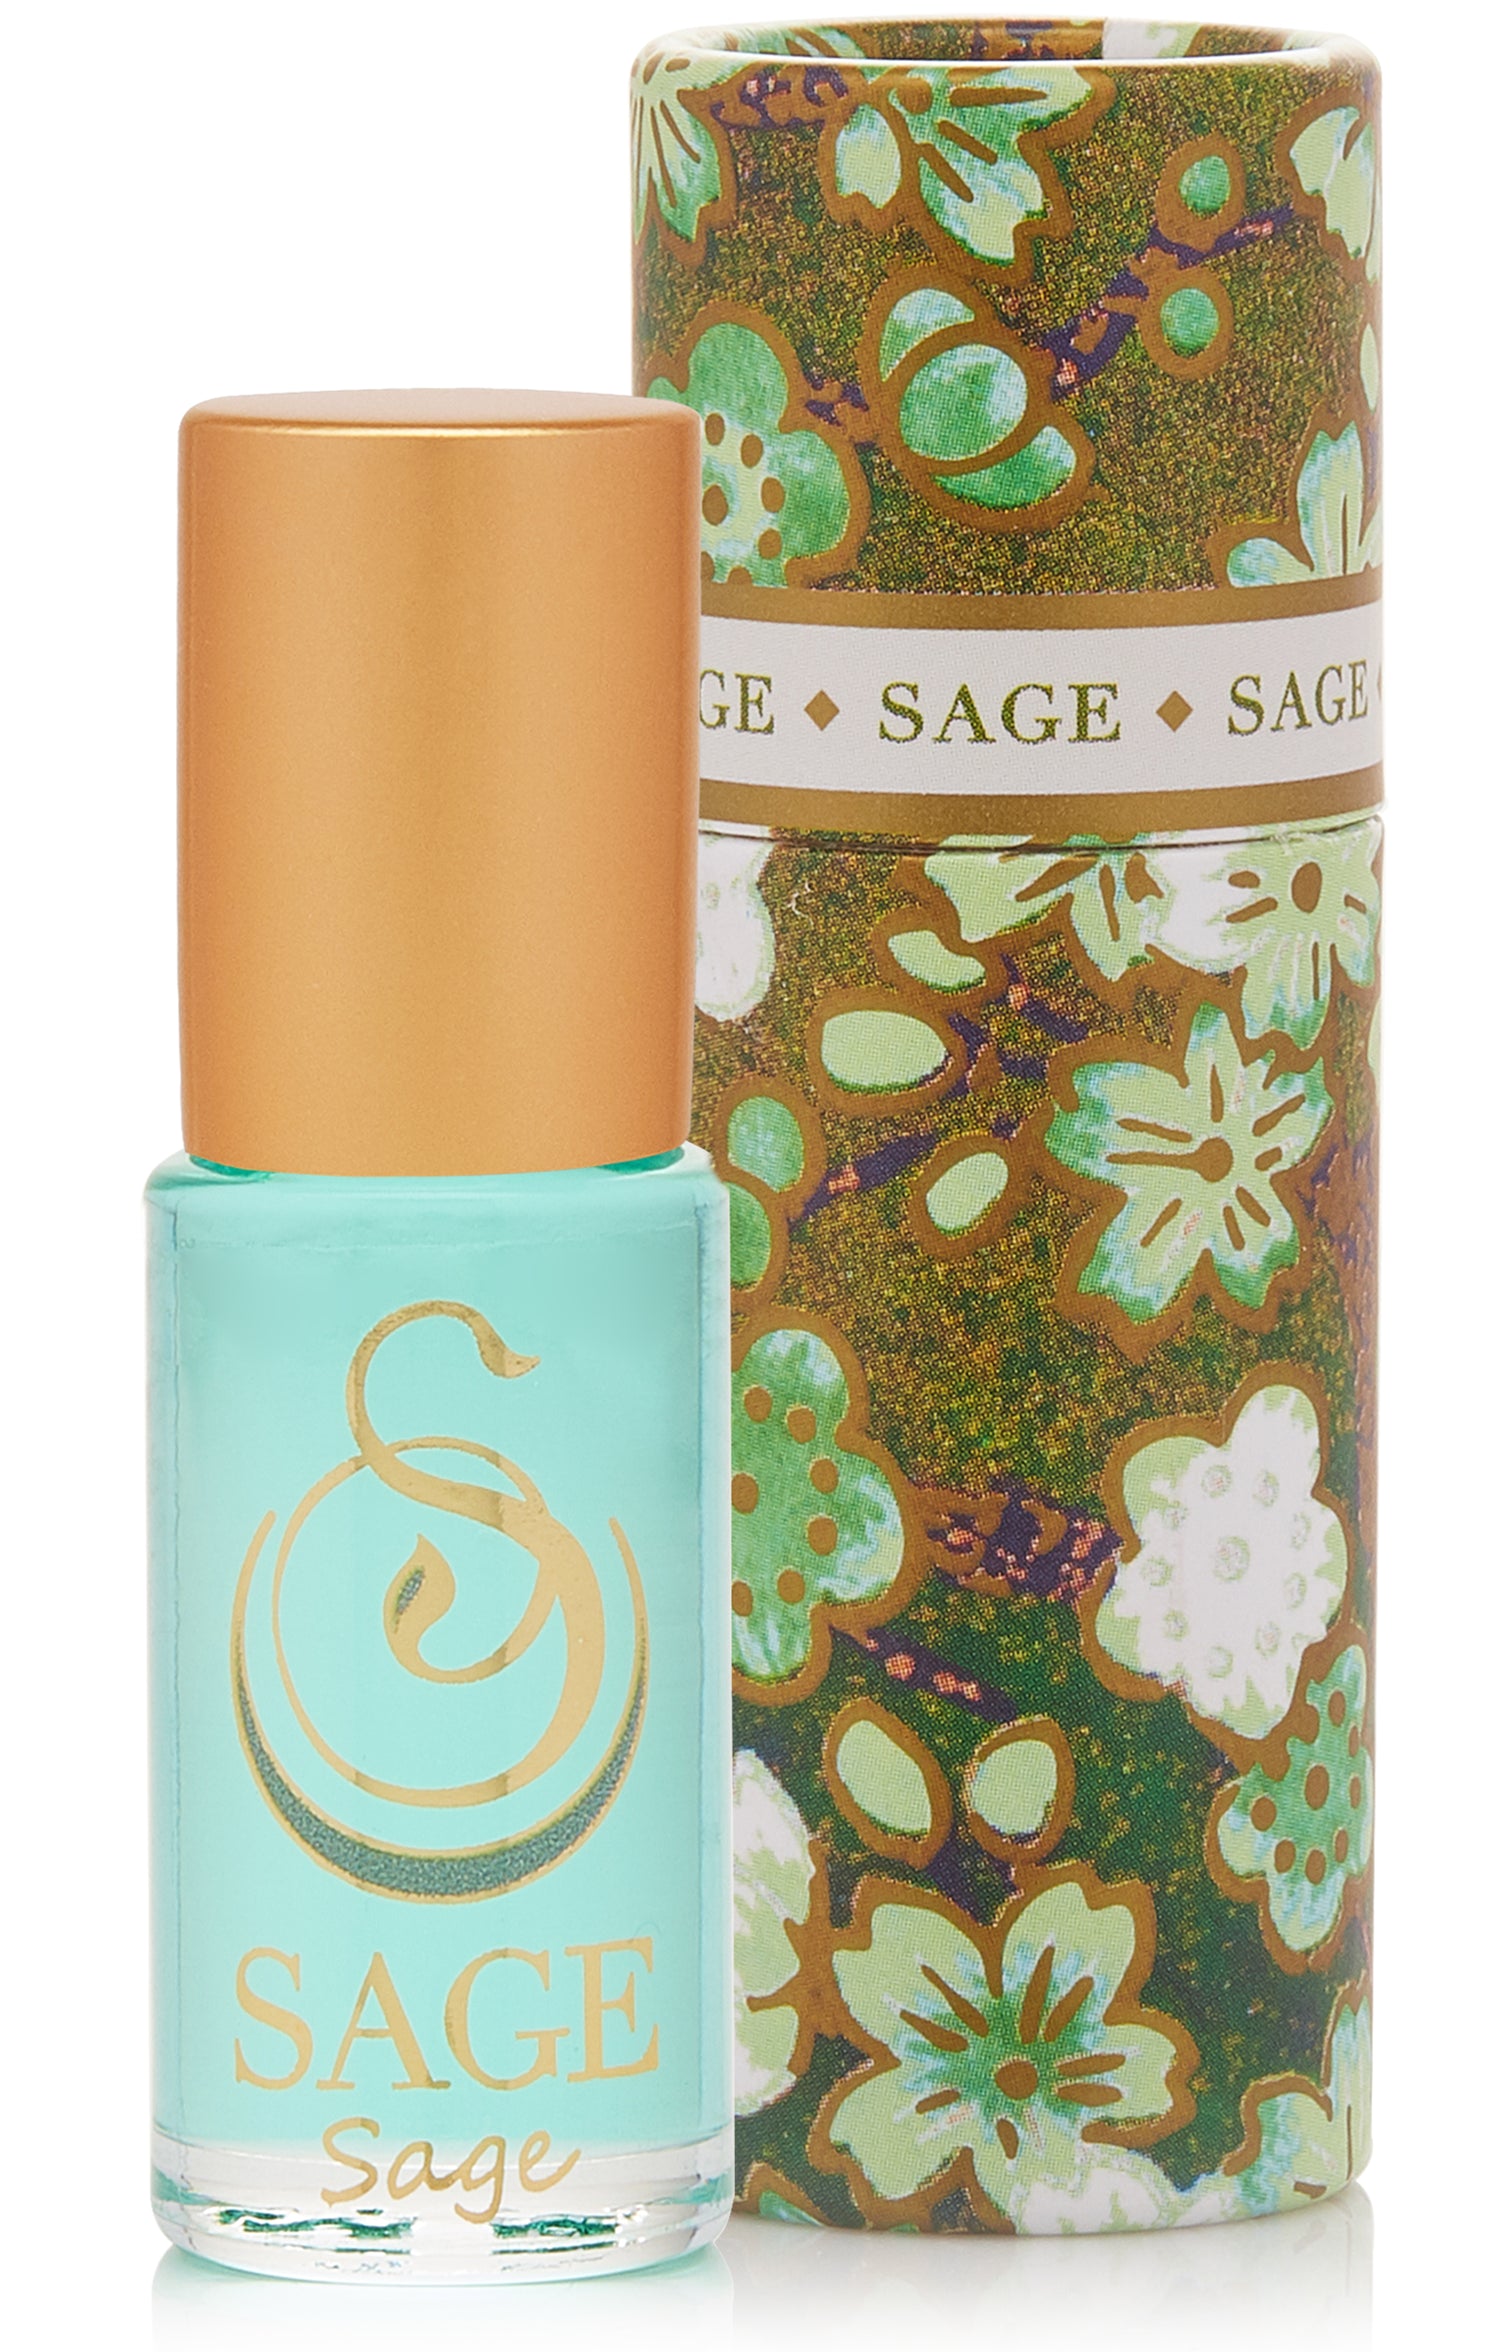 Sage Perfume Oil Concentrate Sample by Sage